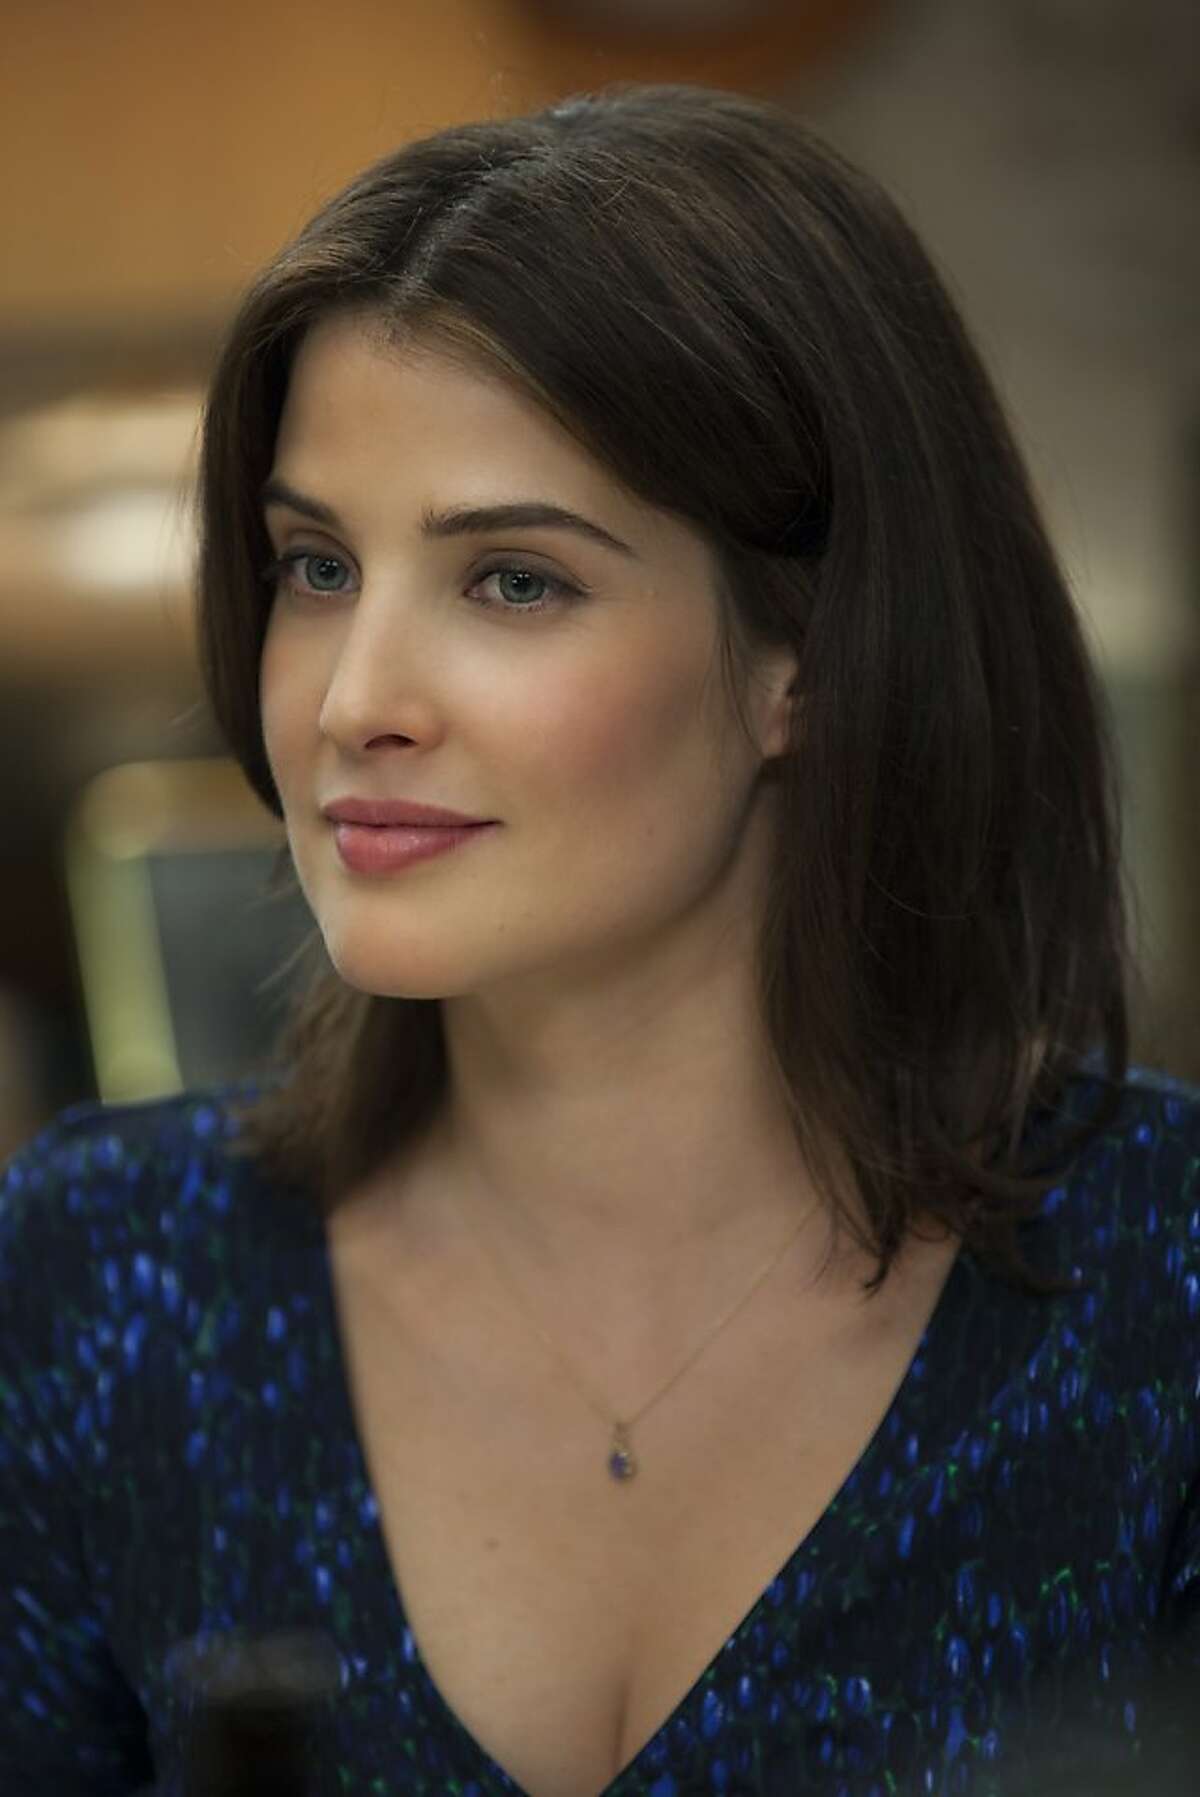 Cobie Smulders stars as Emma in DreamWorks Pictures' heartfelt comedy, "Delivery Man."